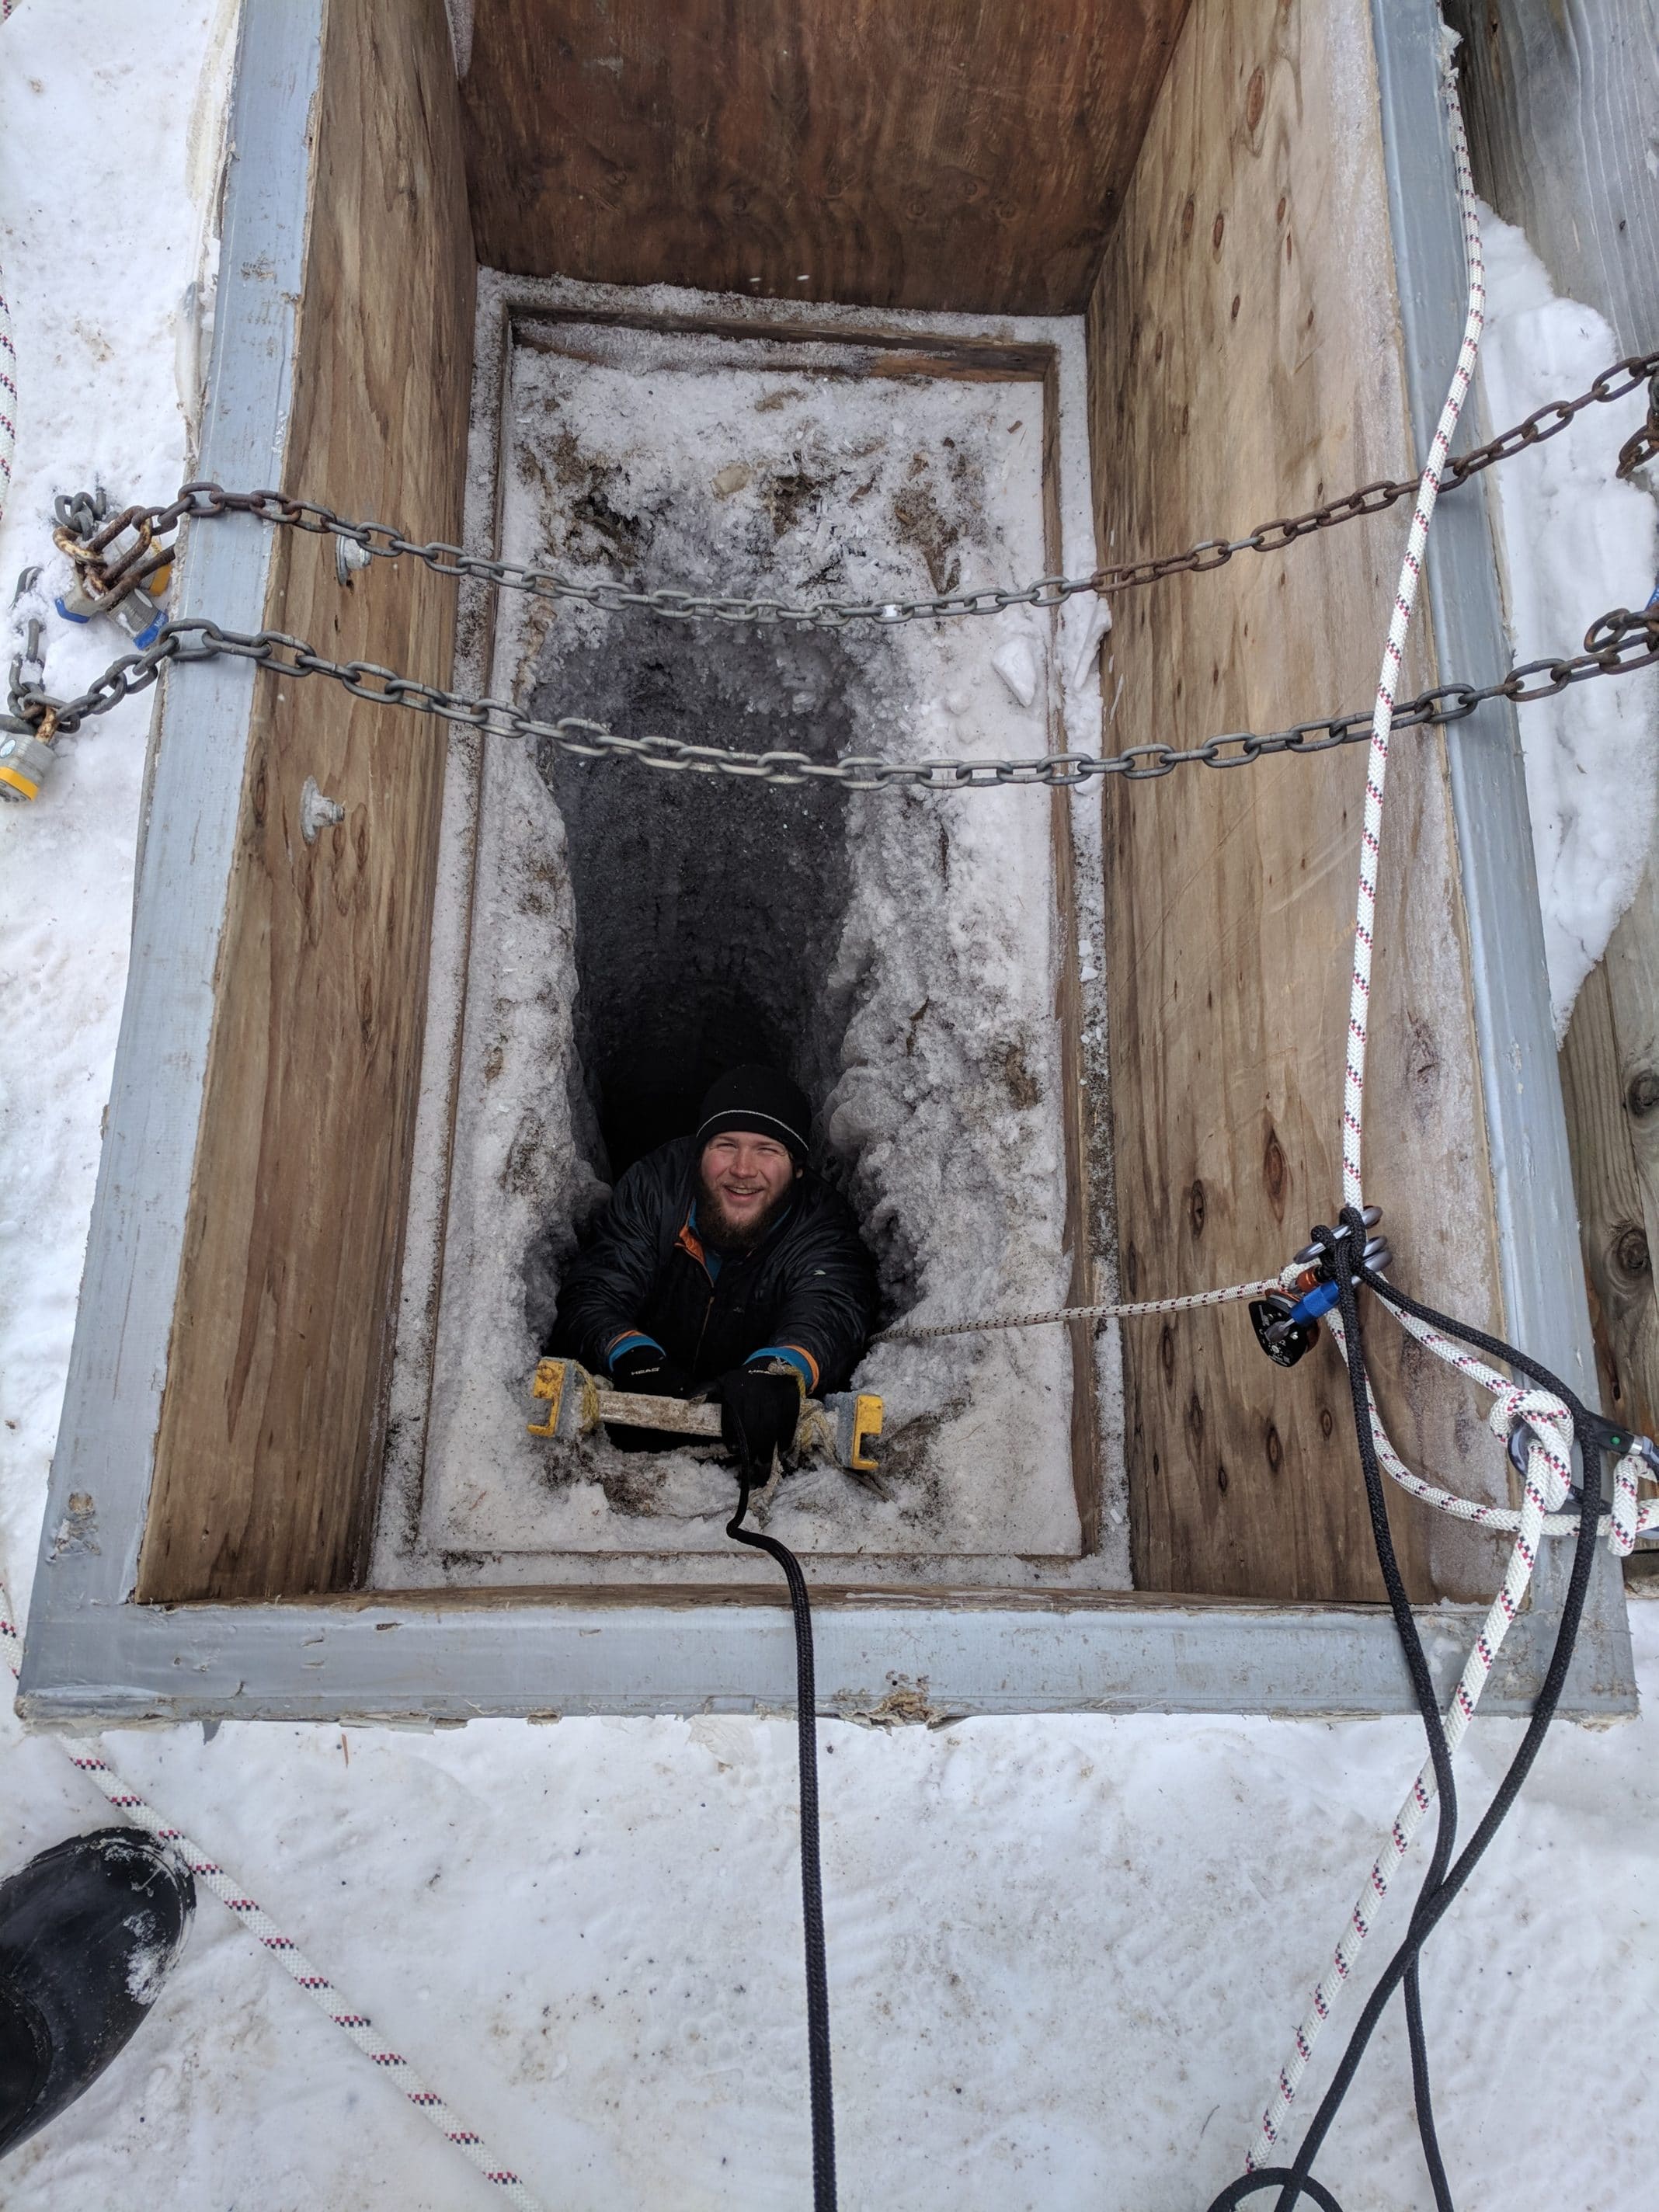 Oceanography graduate student Zac Cooper climbs down an icy ladder into the tunnel in May 2018. Researchers are harnessed to a rope for safety.Shelly Carpenter/University of Washington